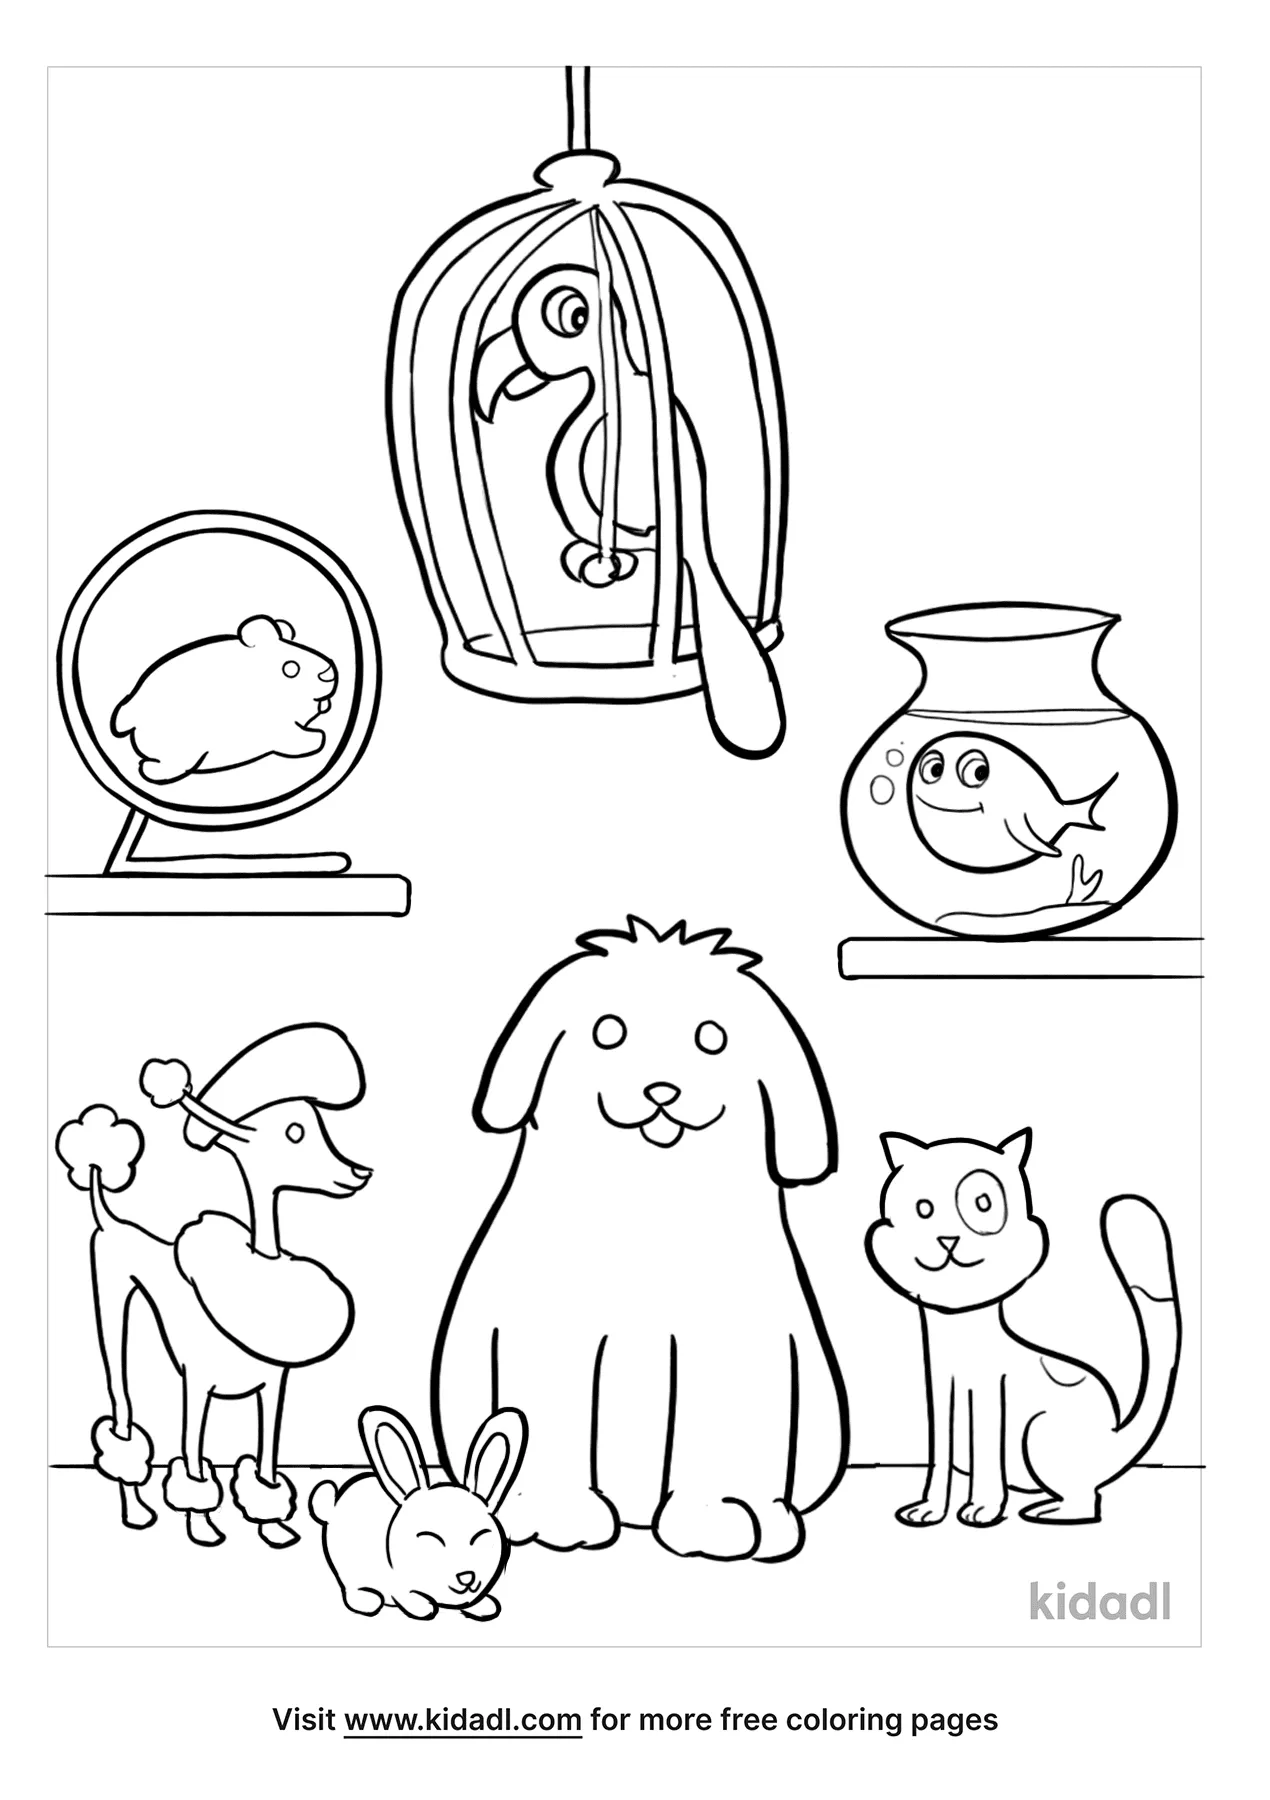 Pet Home Coloring Page   Free Pets Coloring Page   Kidadl